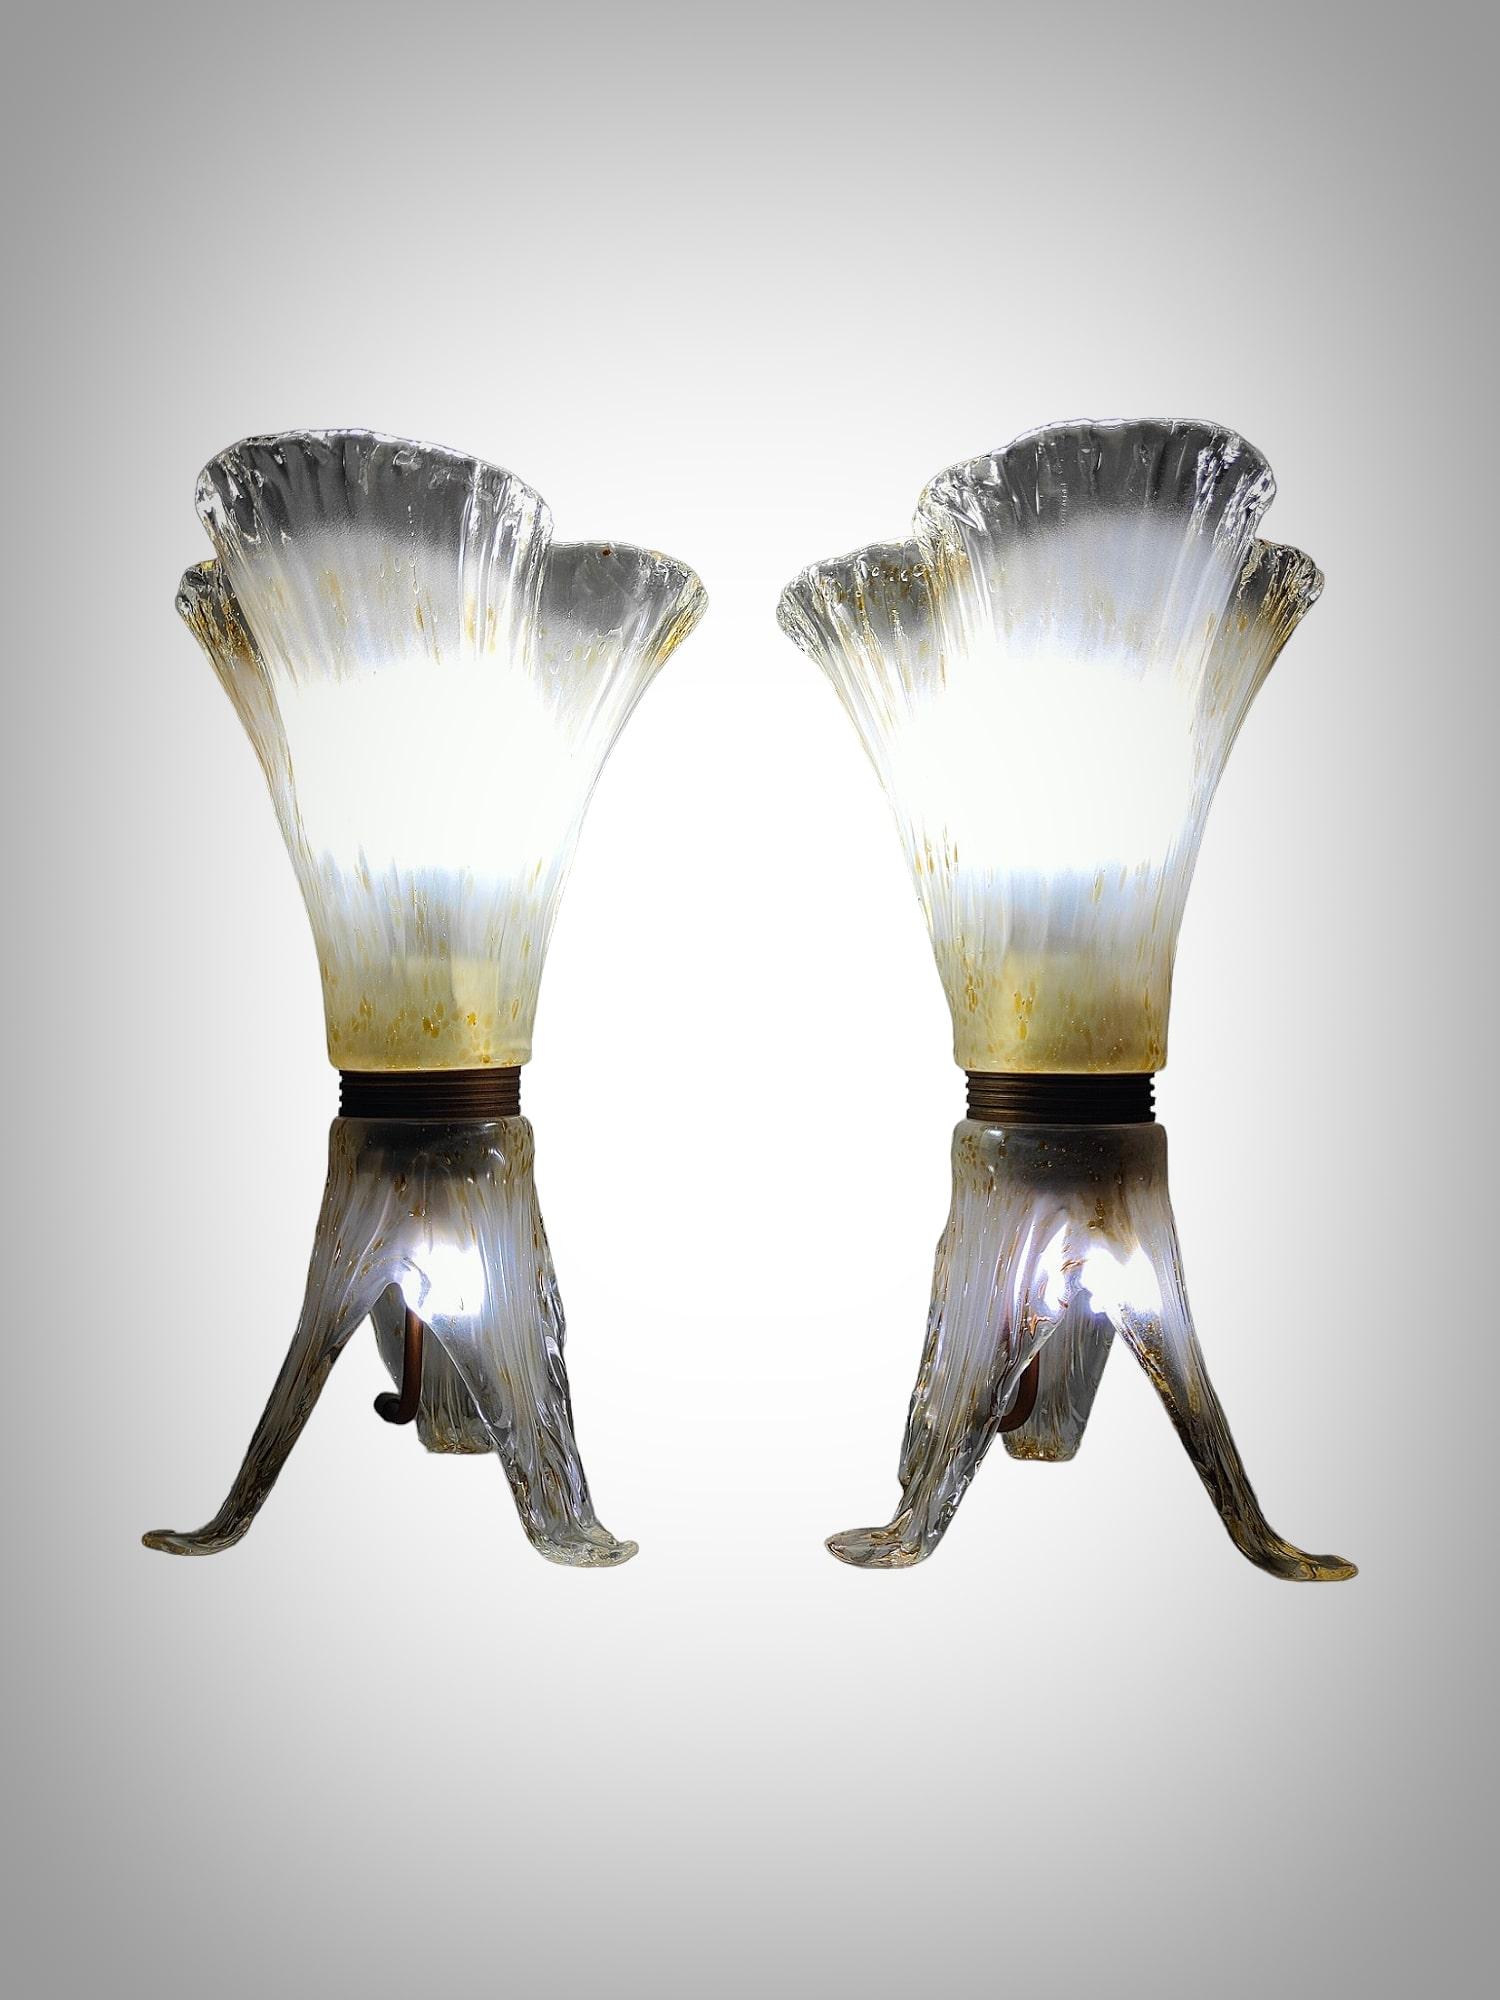 Elegant Pair of Murano Glass Table Lamps - 1970s For Sale 3